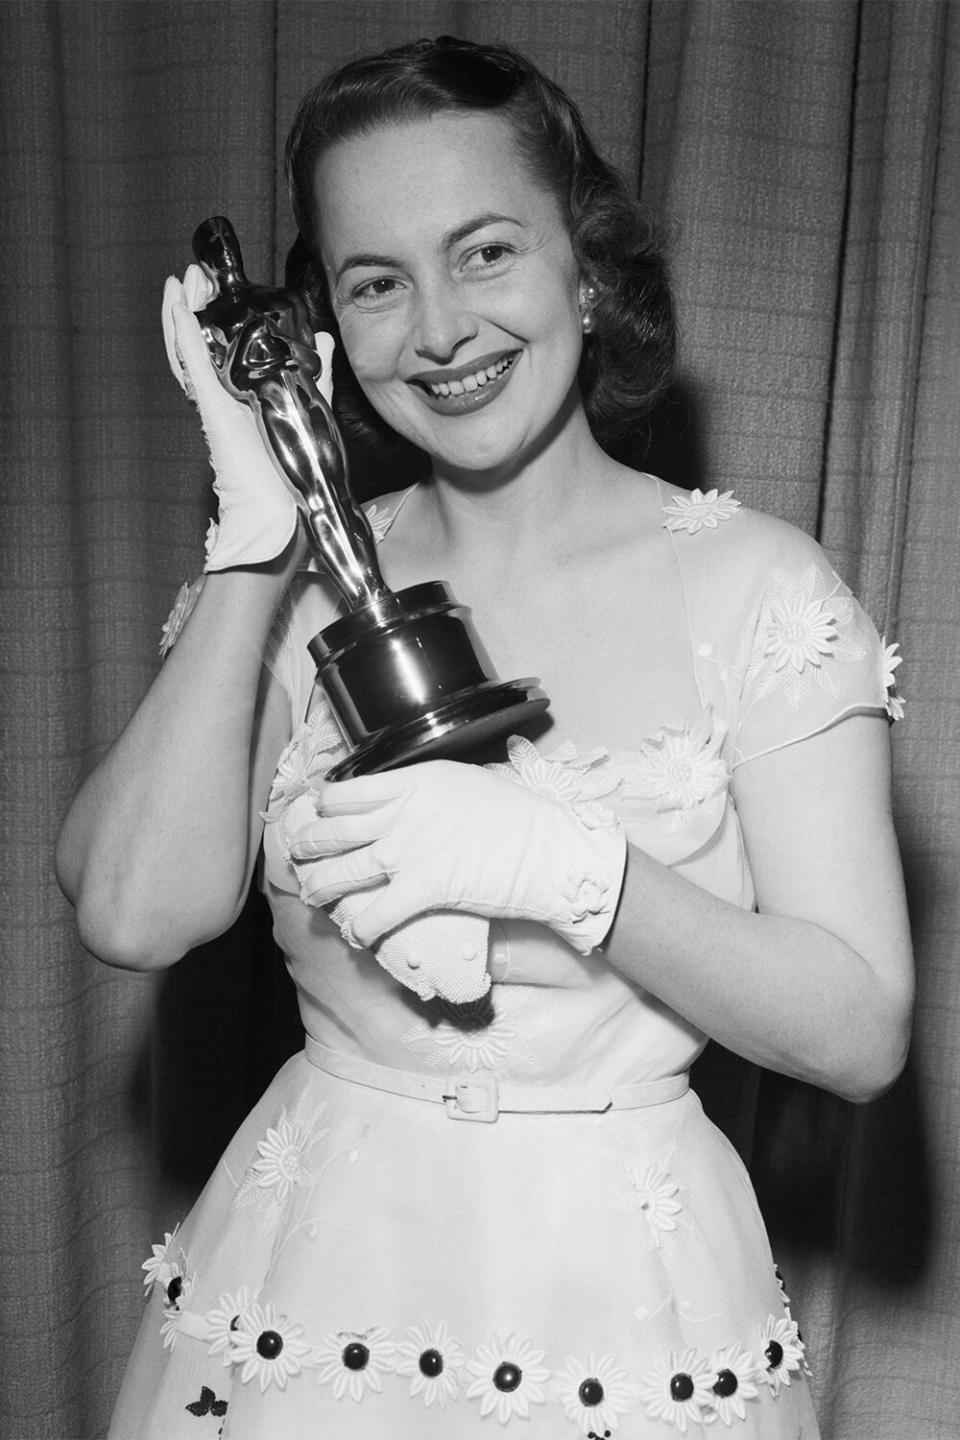 (Original Caption) 3/25/50-Hollywood, California: Actress Olivia De Havilland proudly displays her second "Oscar," awarded for her performance as the Best Actress of 1949 for her role in "The Heiress." Miss De Havilland also won top honors in 1946.